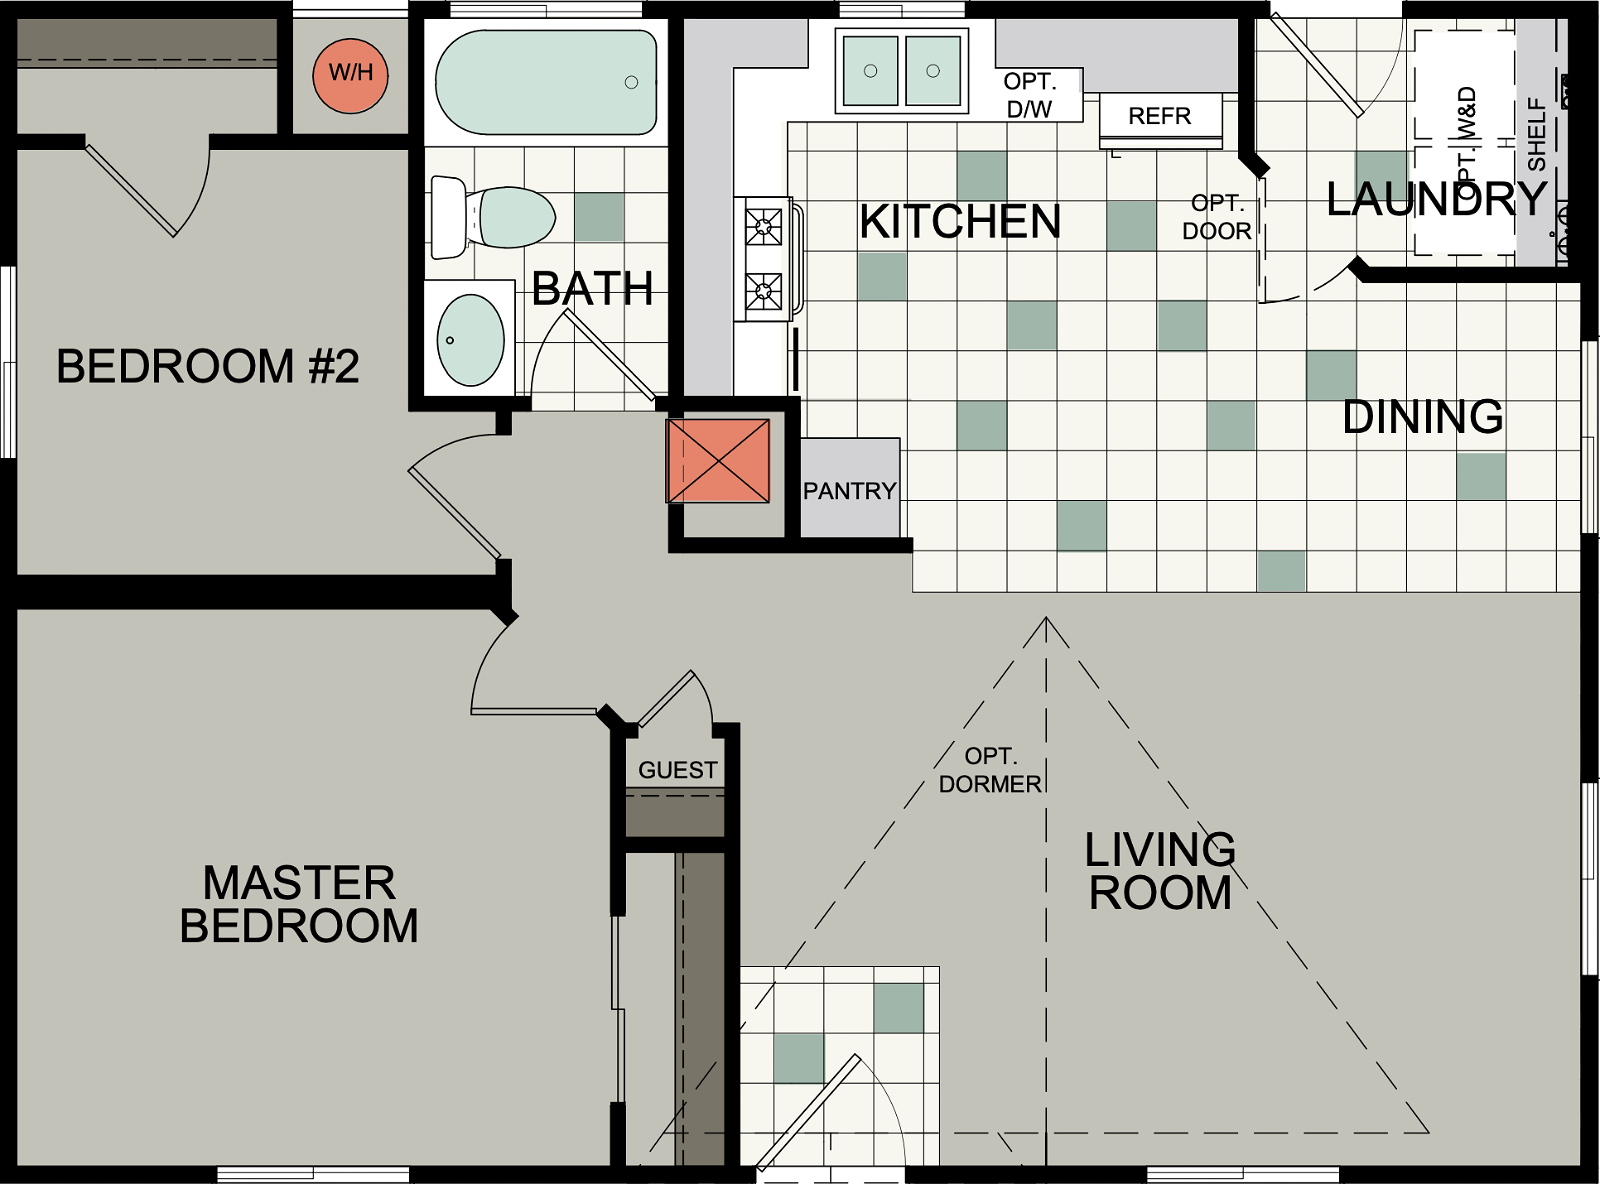 Bd 02 floor plan cropped and hero home features